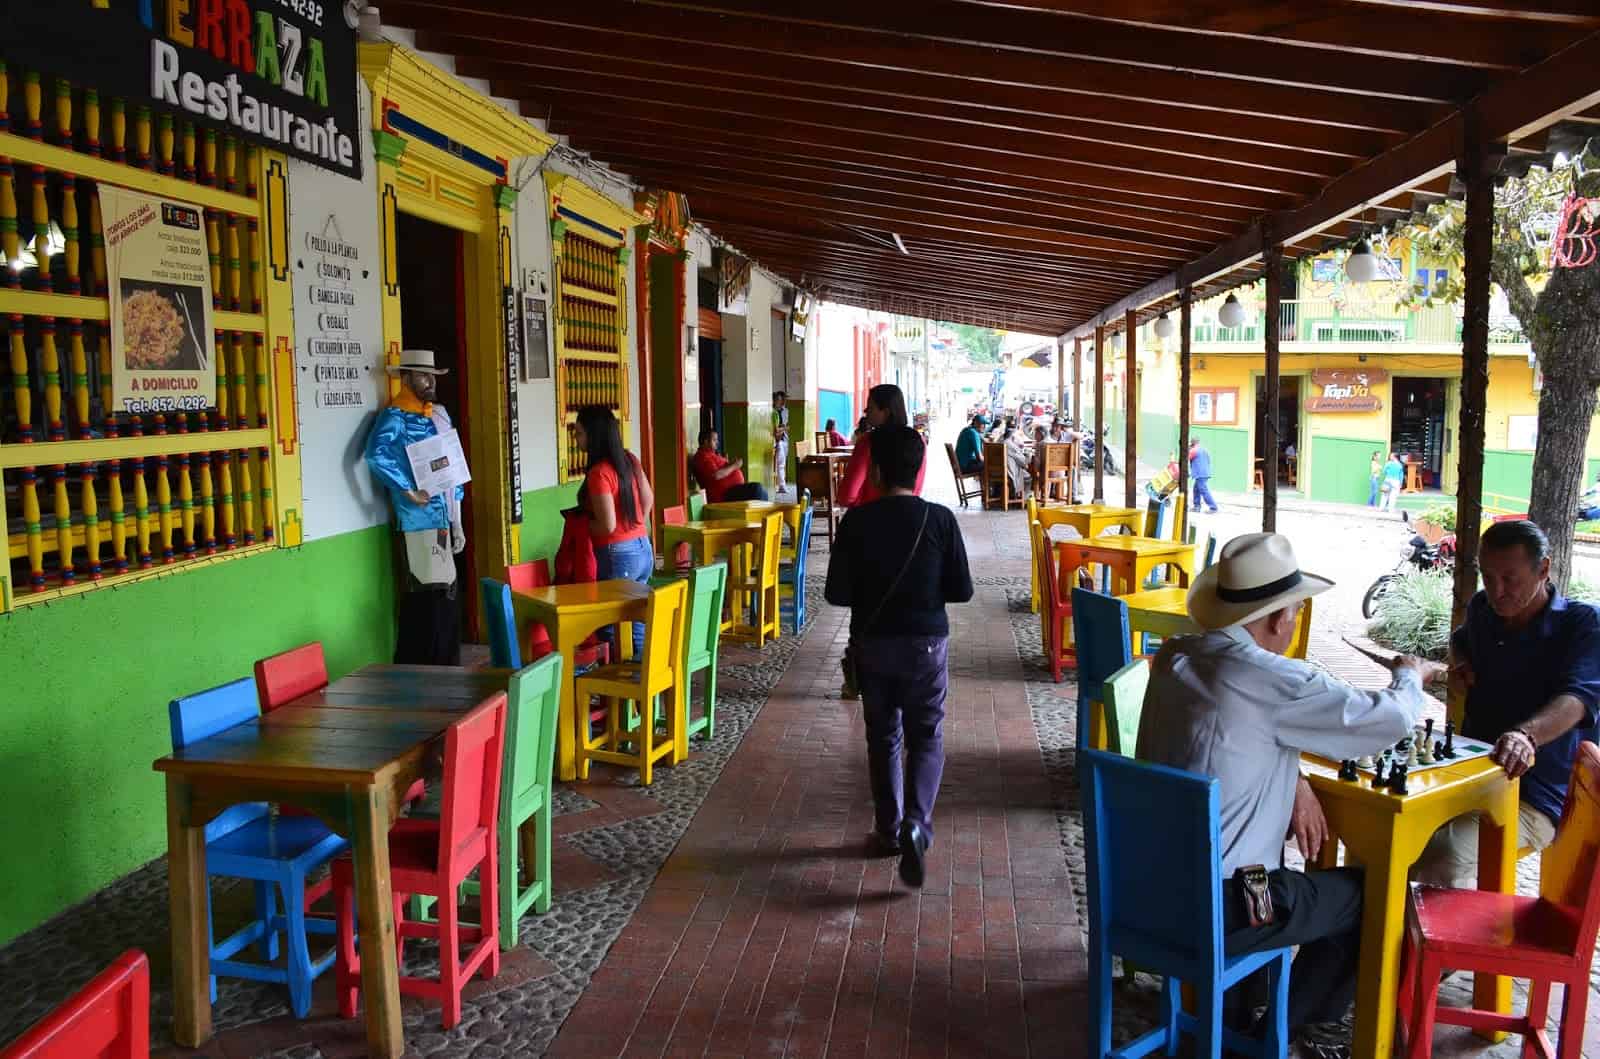 Restaurant on the plaza in Jericó, Antioquia, Colombia